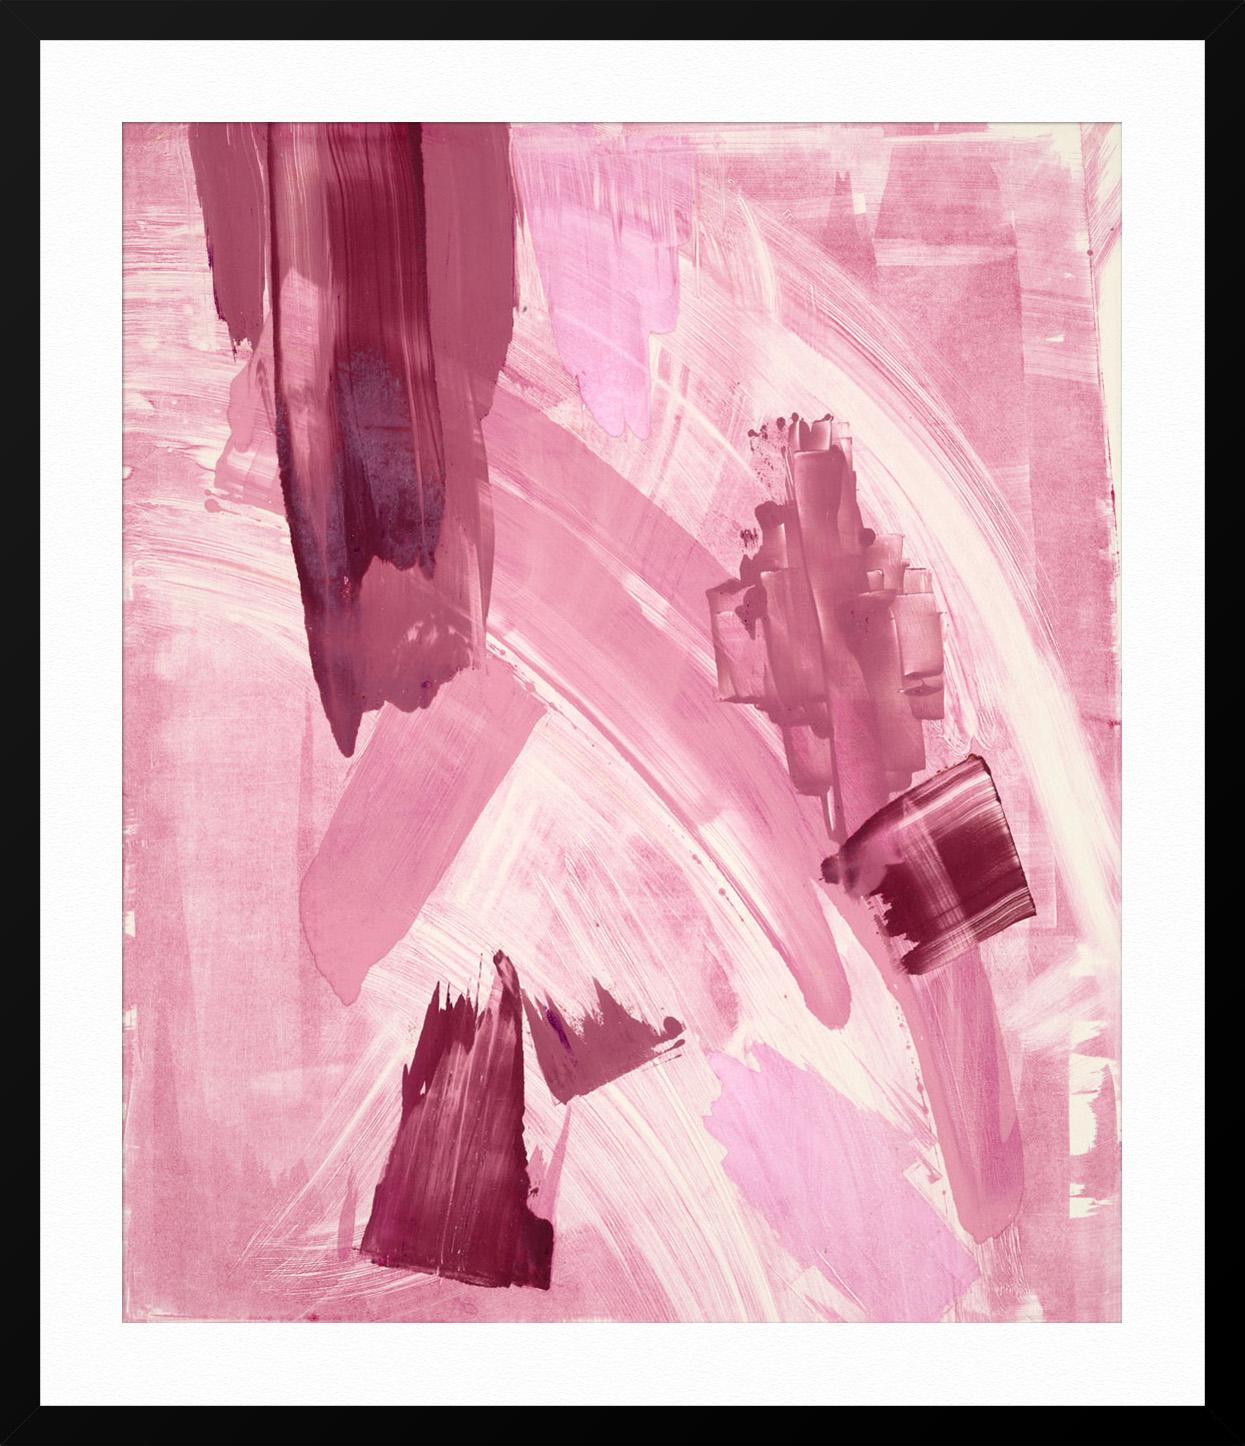 ABOUT THIS ARTIST: Anna Ullman produces large works on paper and canvas with a series of fluid and graphic shapes in black and white, as well as splashes of bright colors. Monoprinting, her specialty, is a form of printmaking that is more painterly,